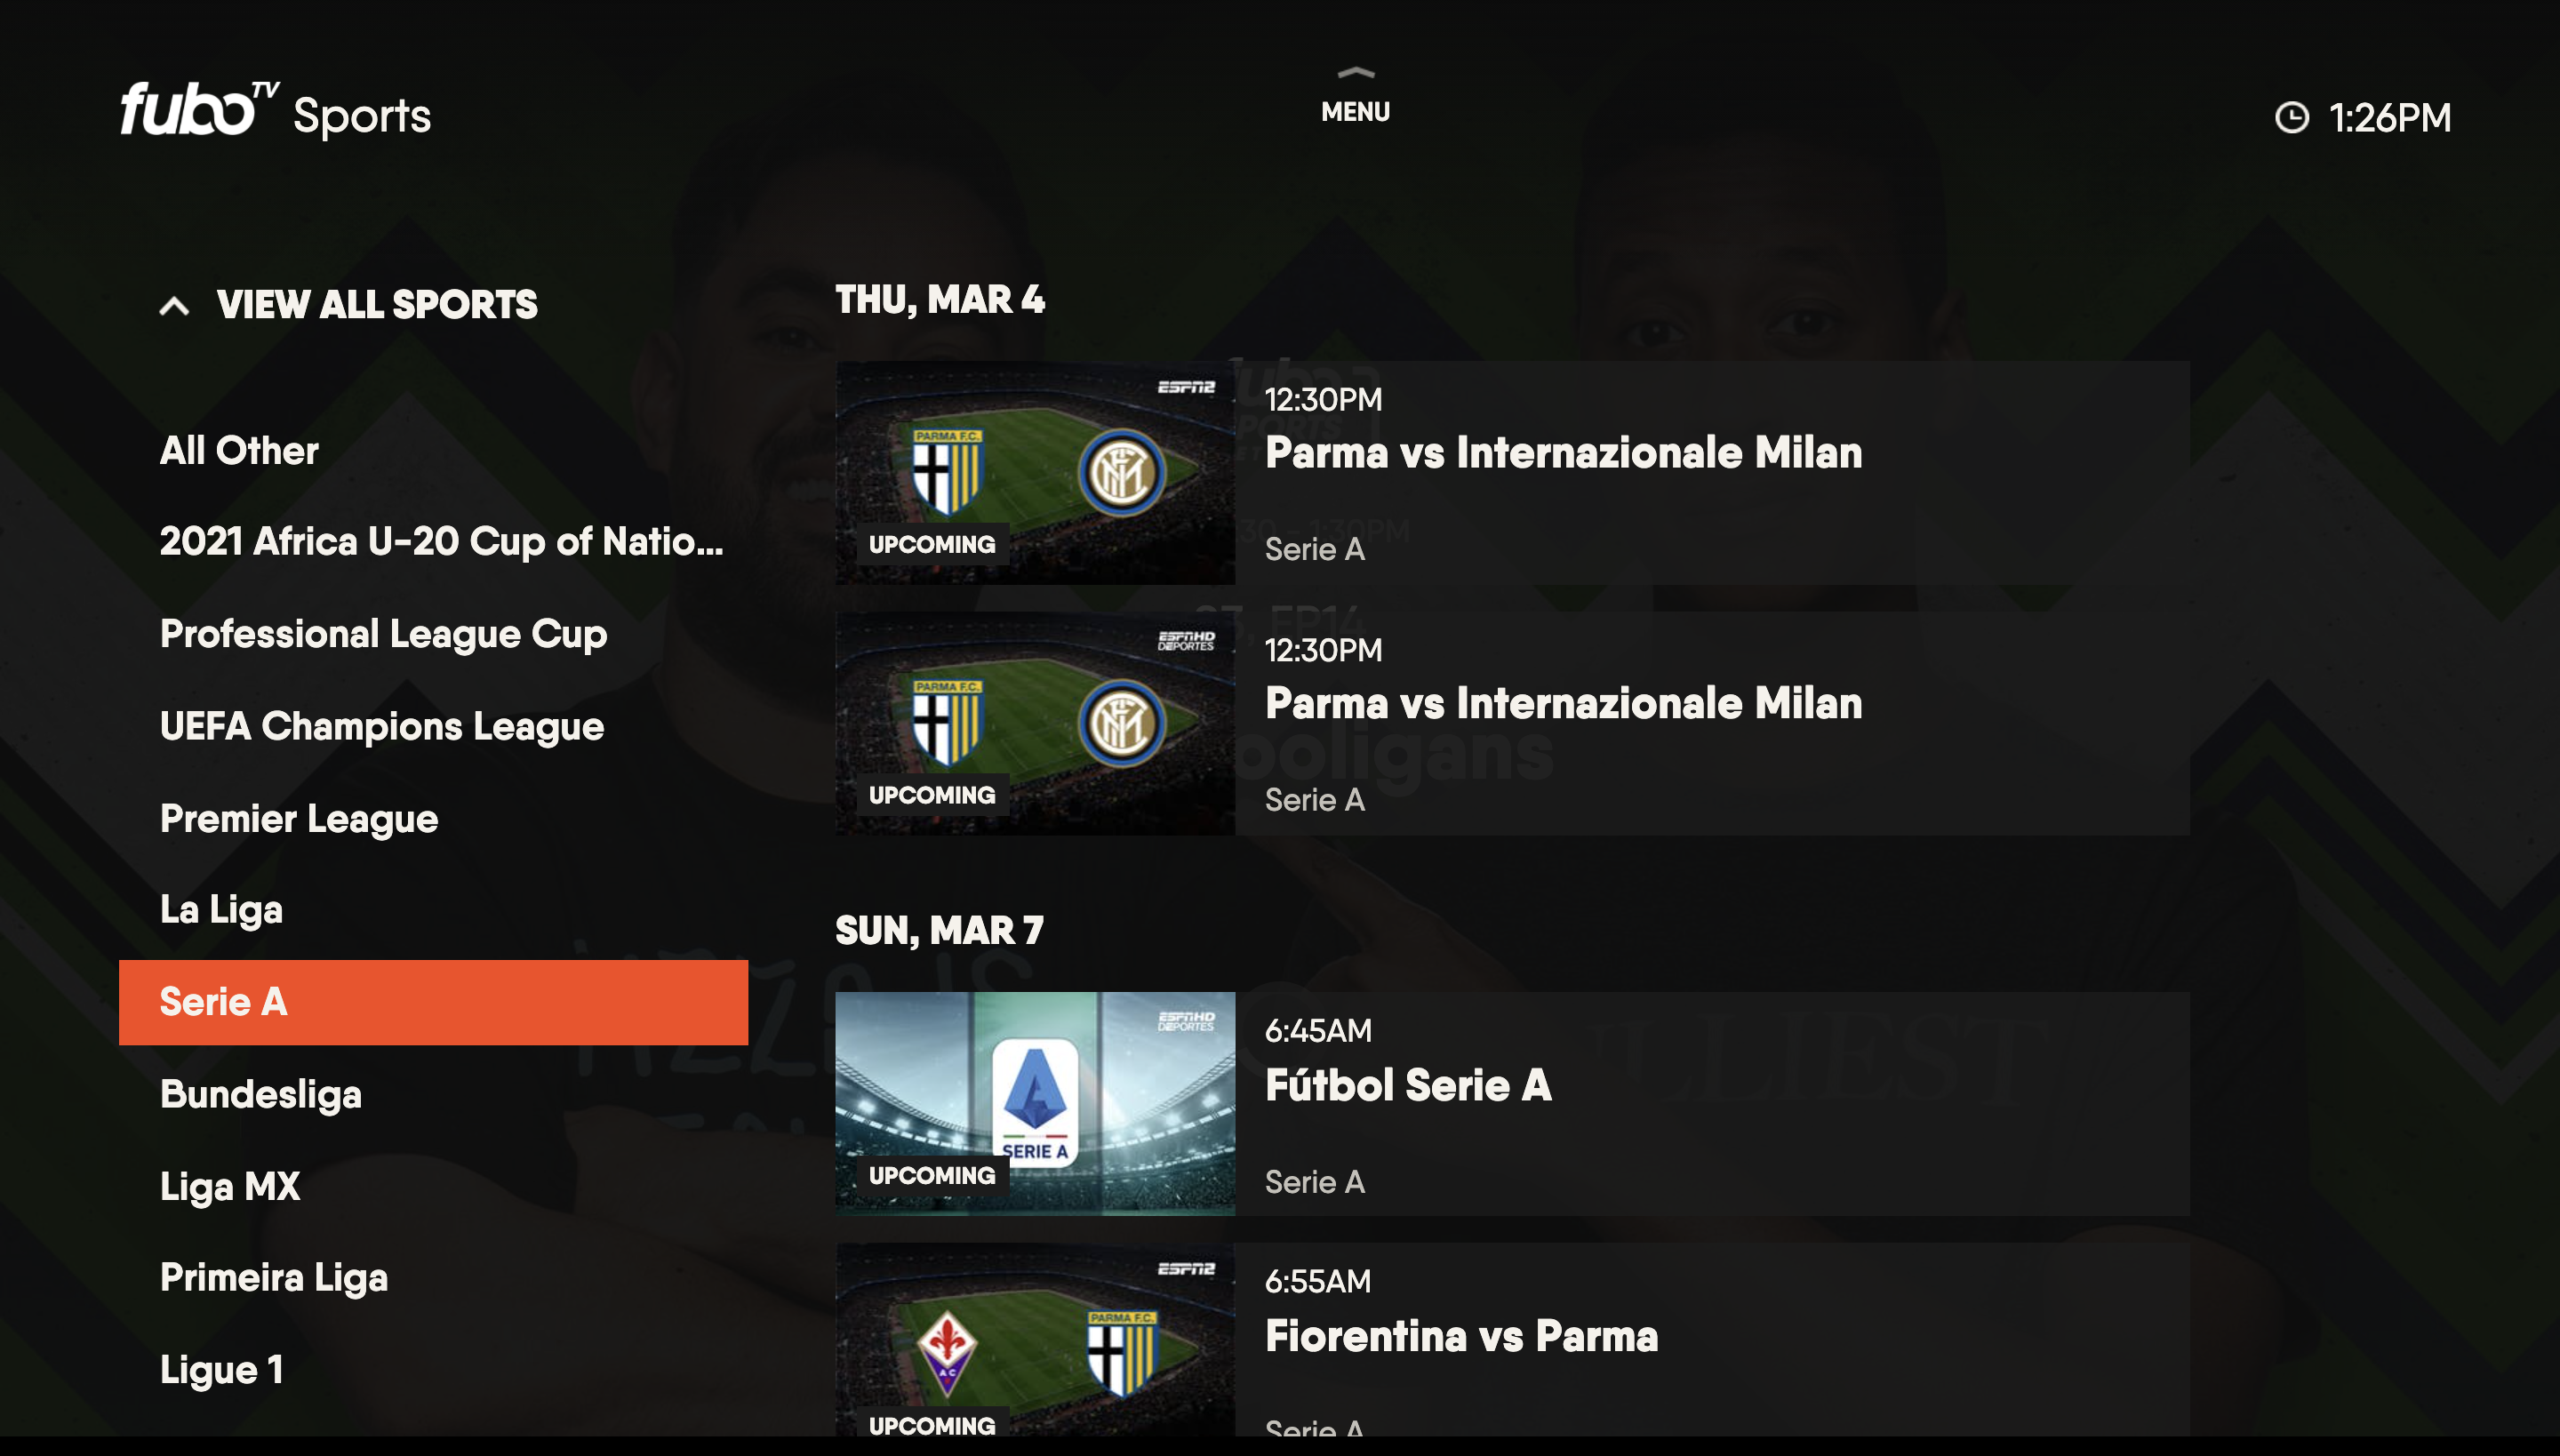 SPORTS screen of the Fubo app on Samsung TV with individual sport filters highlighted